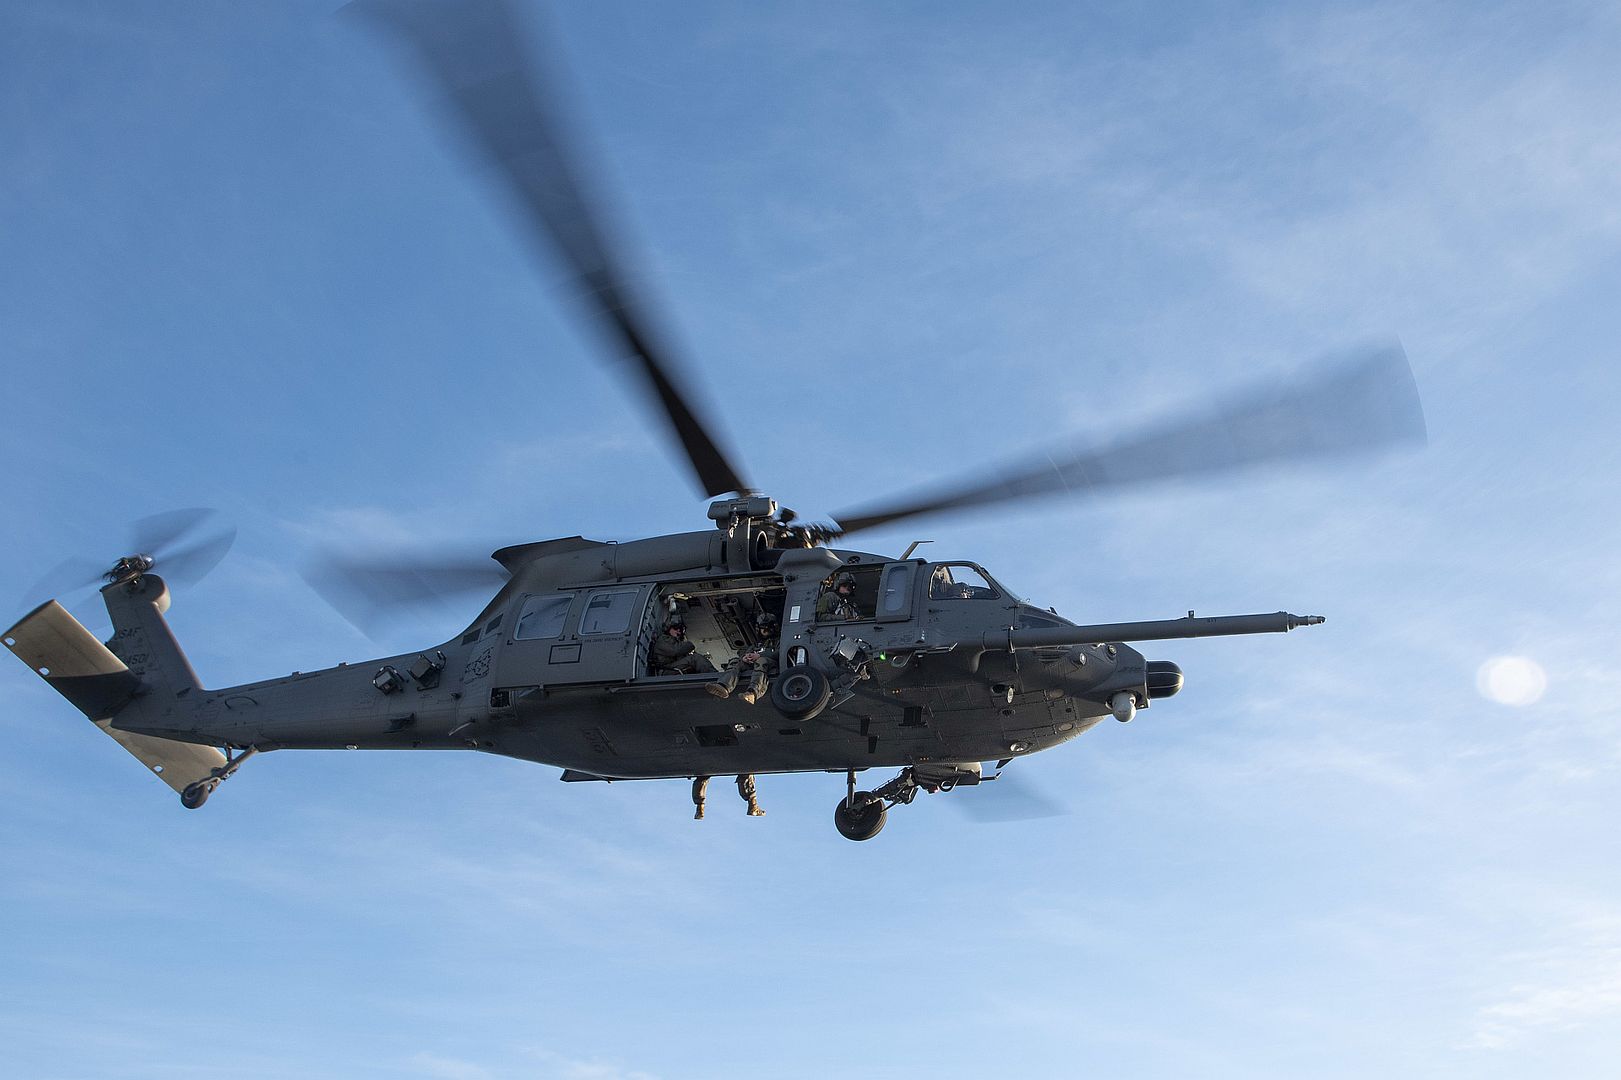 60 Pave Hawk Helicopter Assigned To The 66th Rescue Squadron Flies Over Amphibious Assault Carrier USS Tripoli